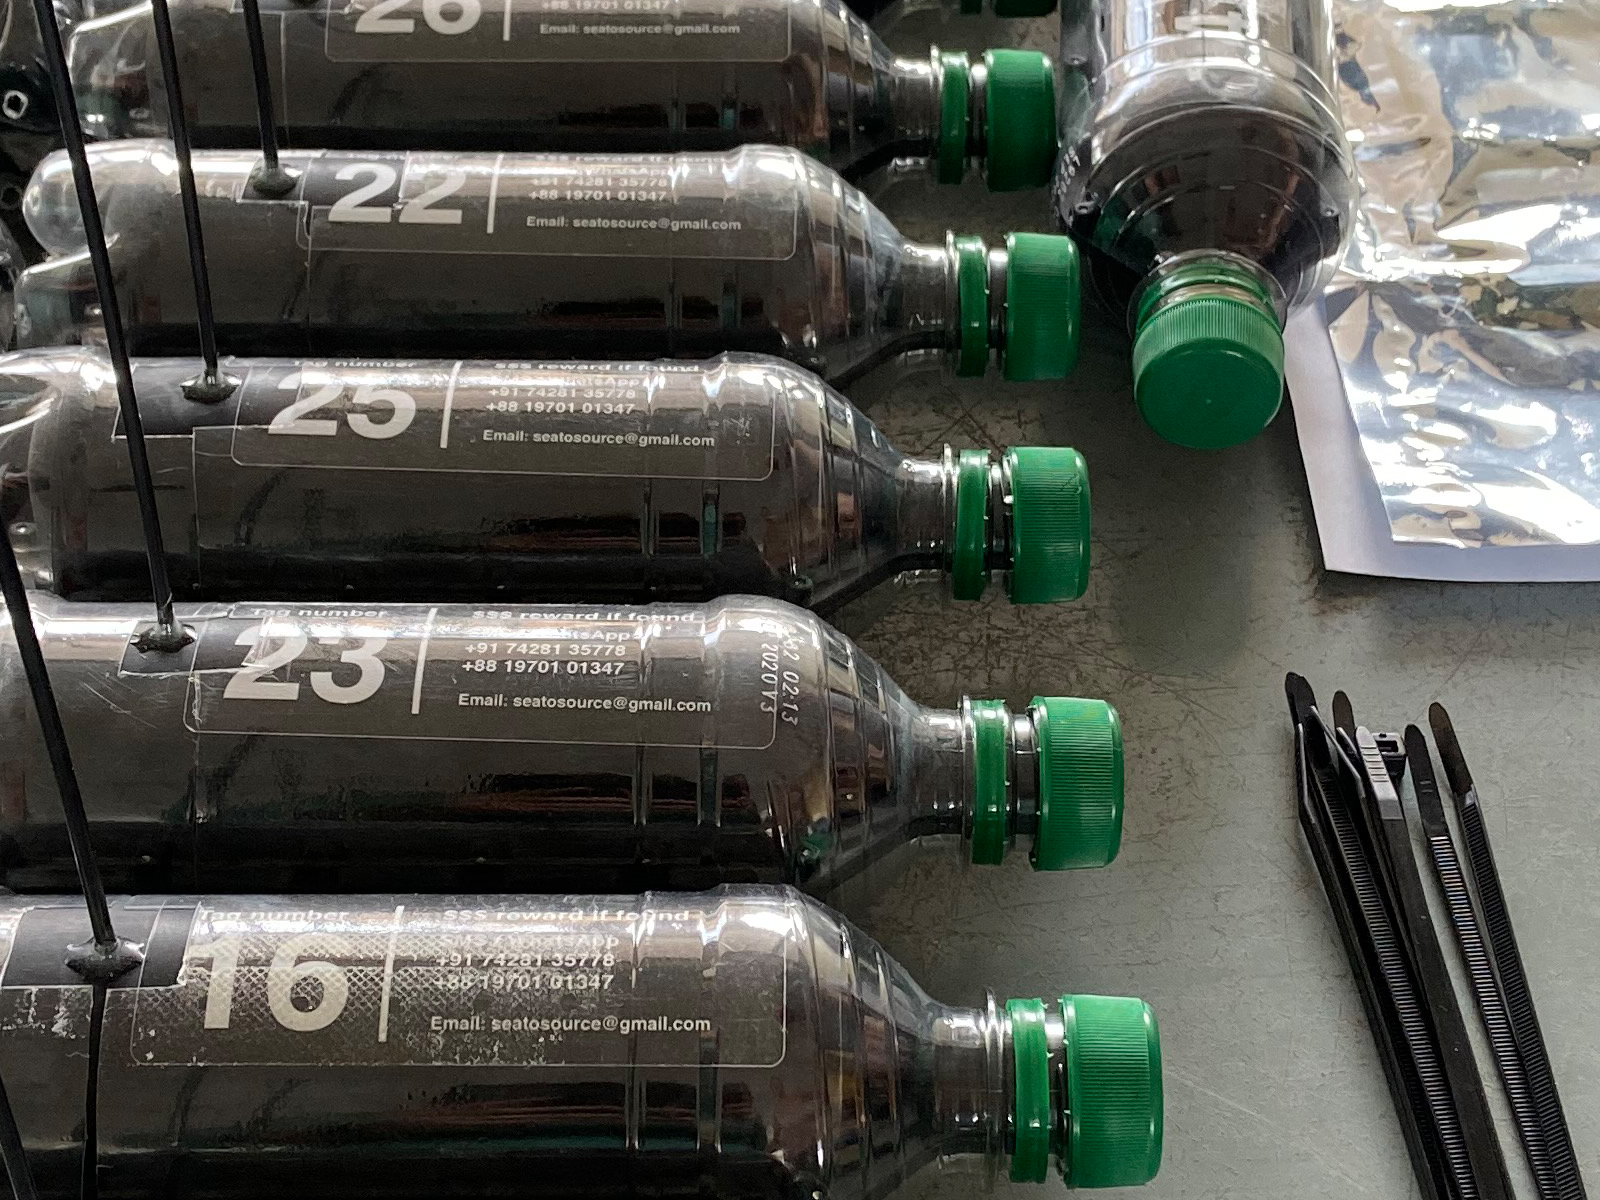 Bottle tags ready for release